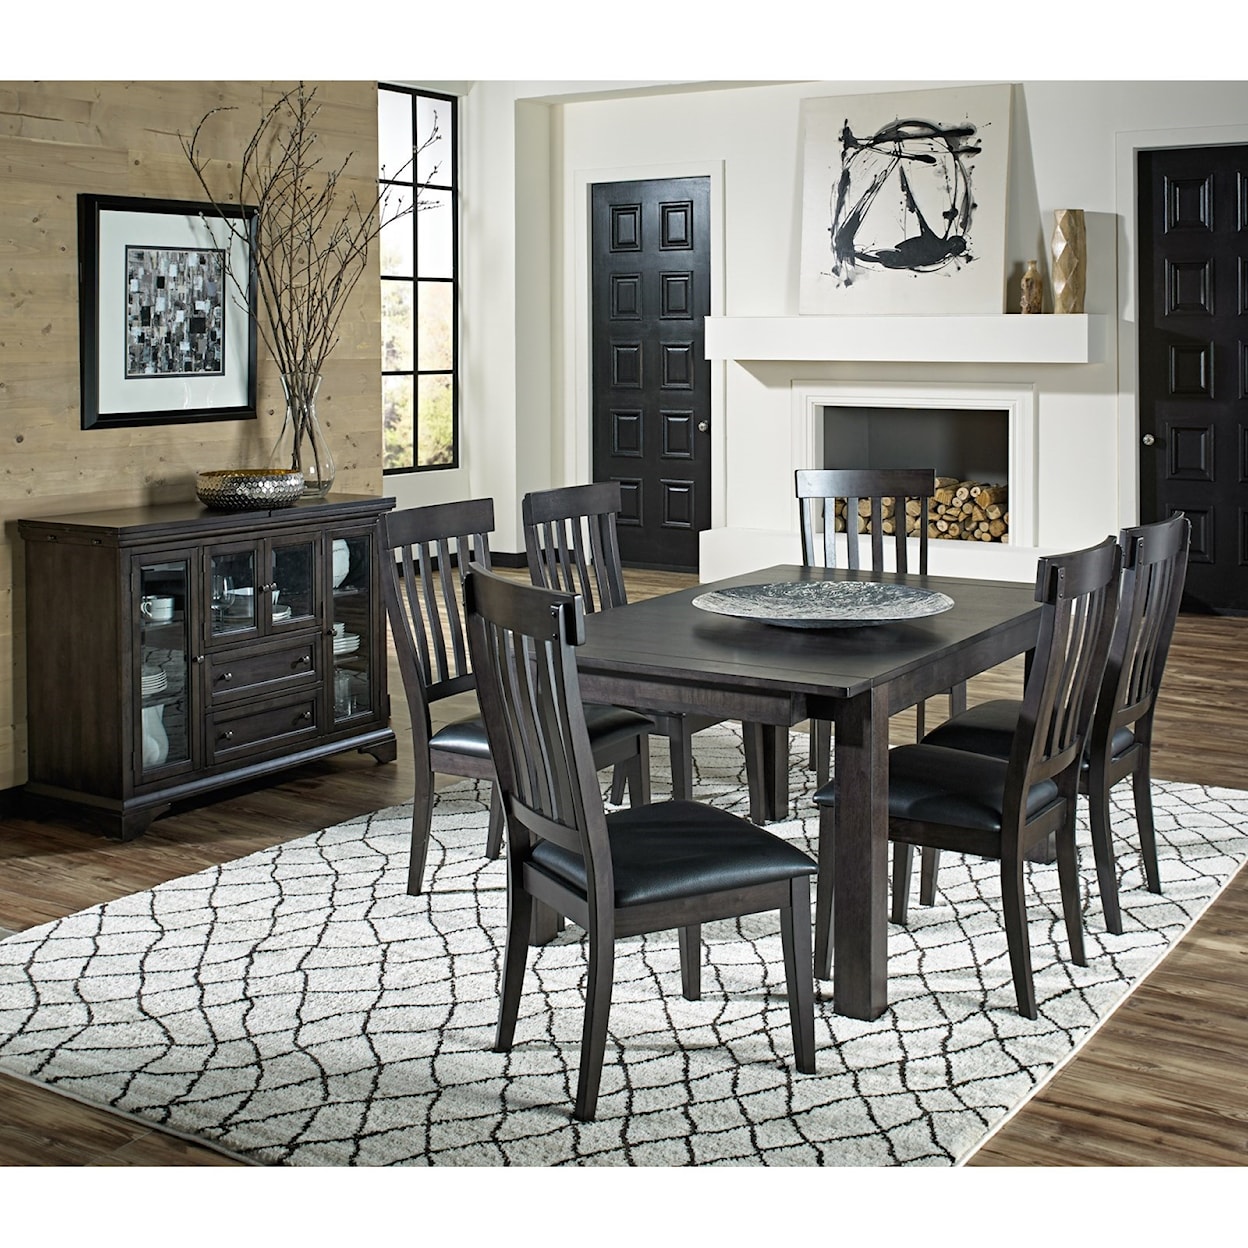 AAmerica Mariposa 7 Piece Table and Chairs Set